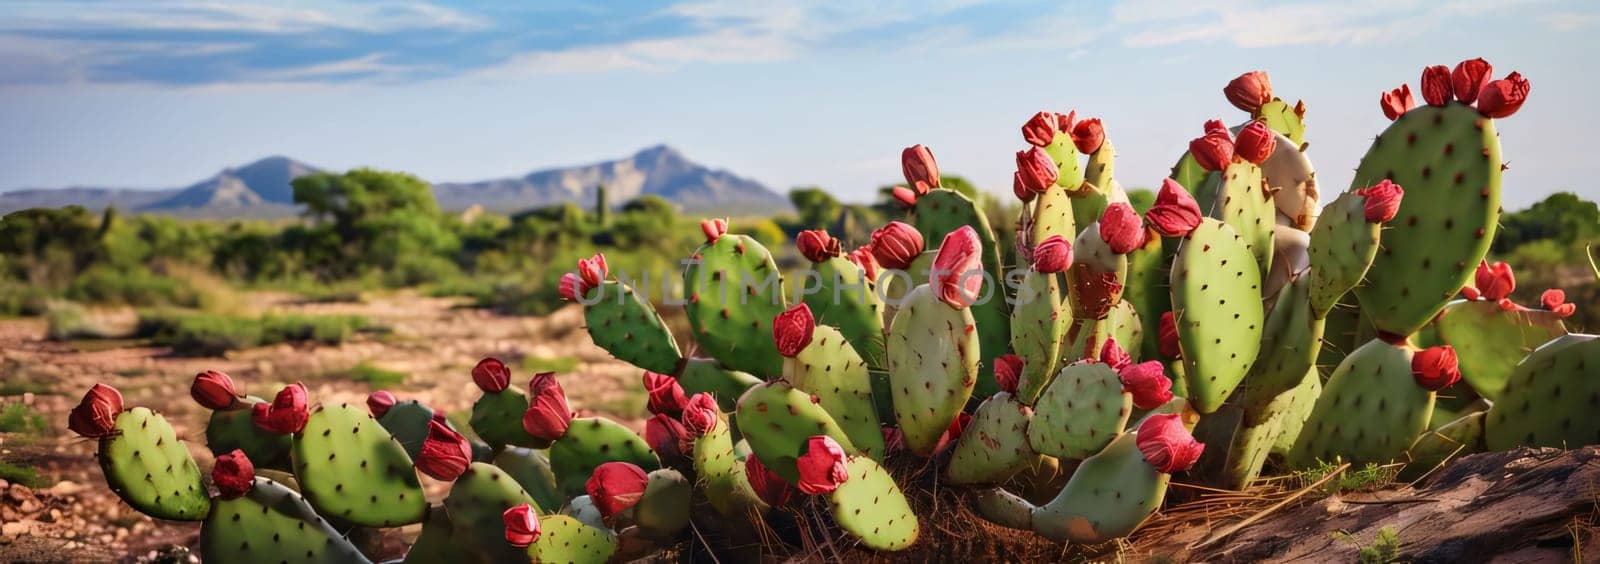 Opuntia cactus with red flowers in the Arizona desert. by ThemesS